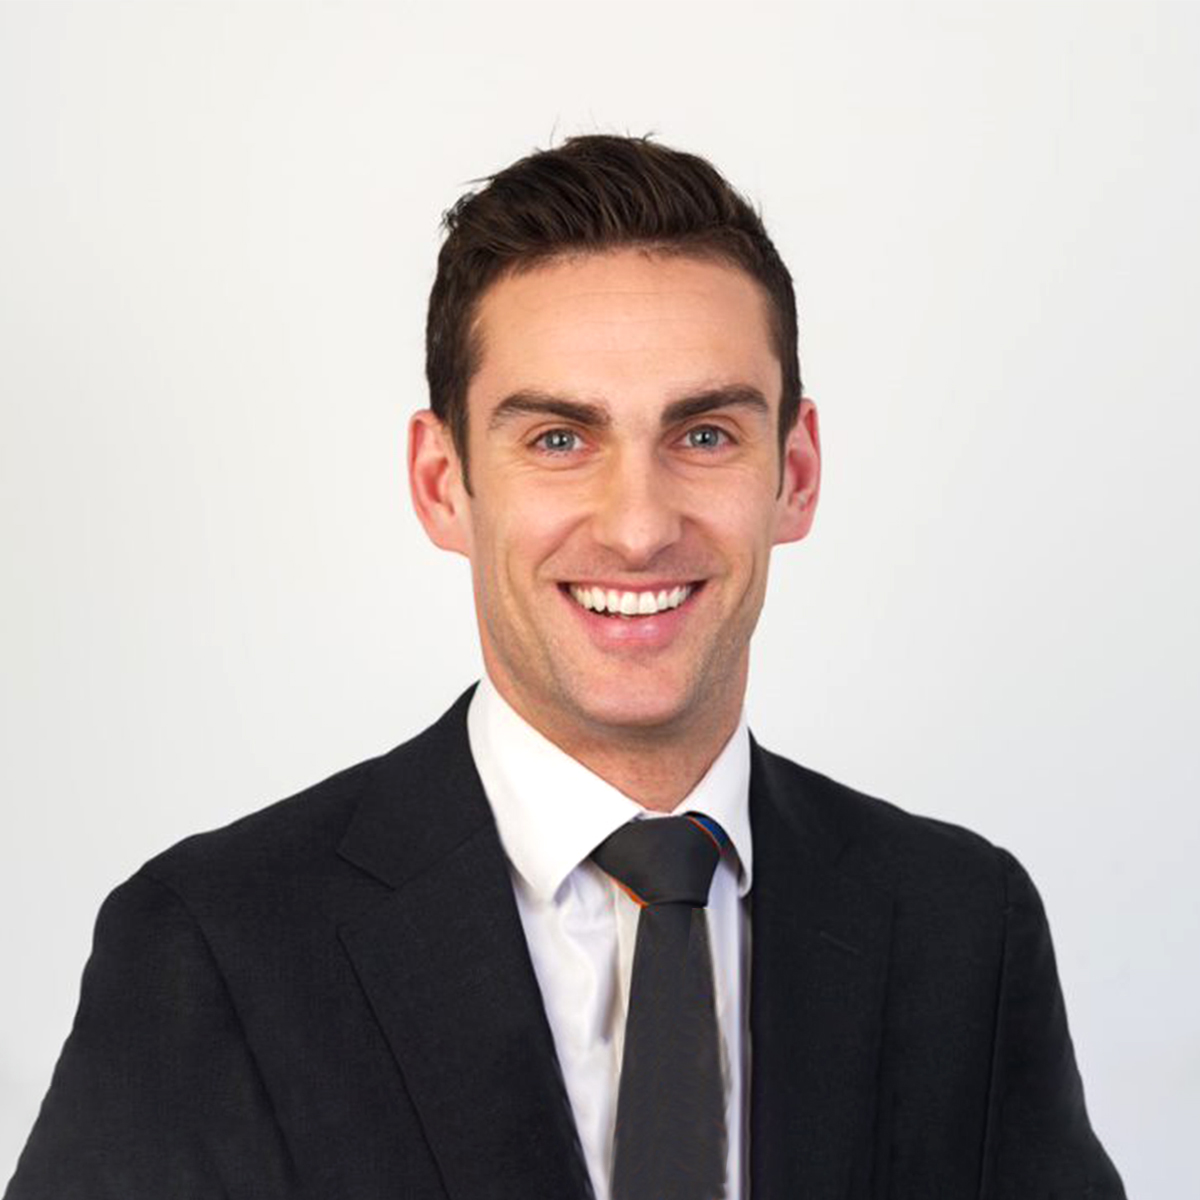 Andrew Knowles Business banking business man headshot